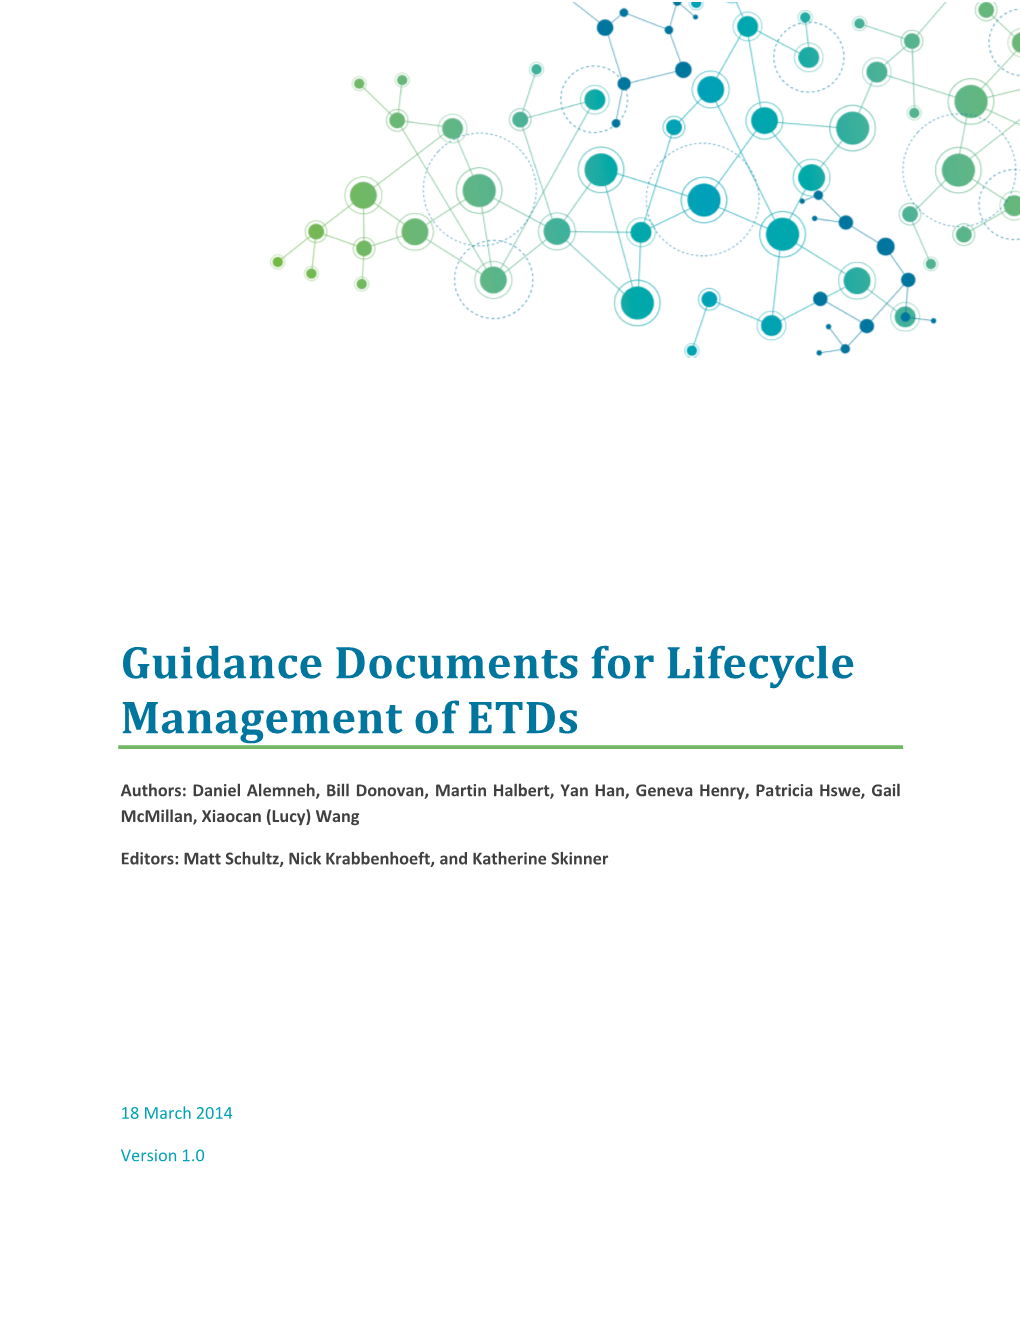 Guidance Documents for Lifecycle Management of Etds